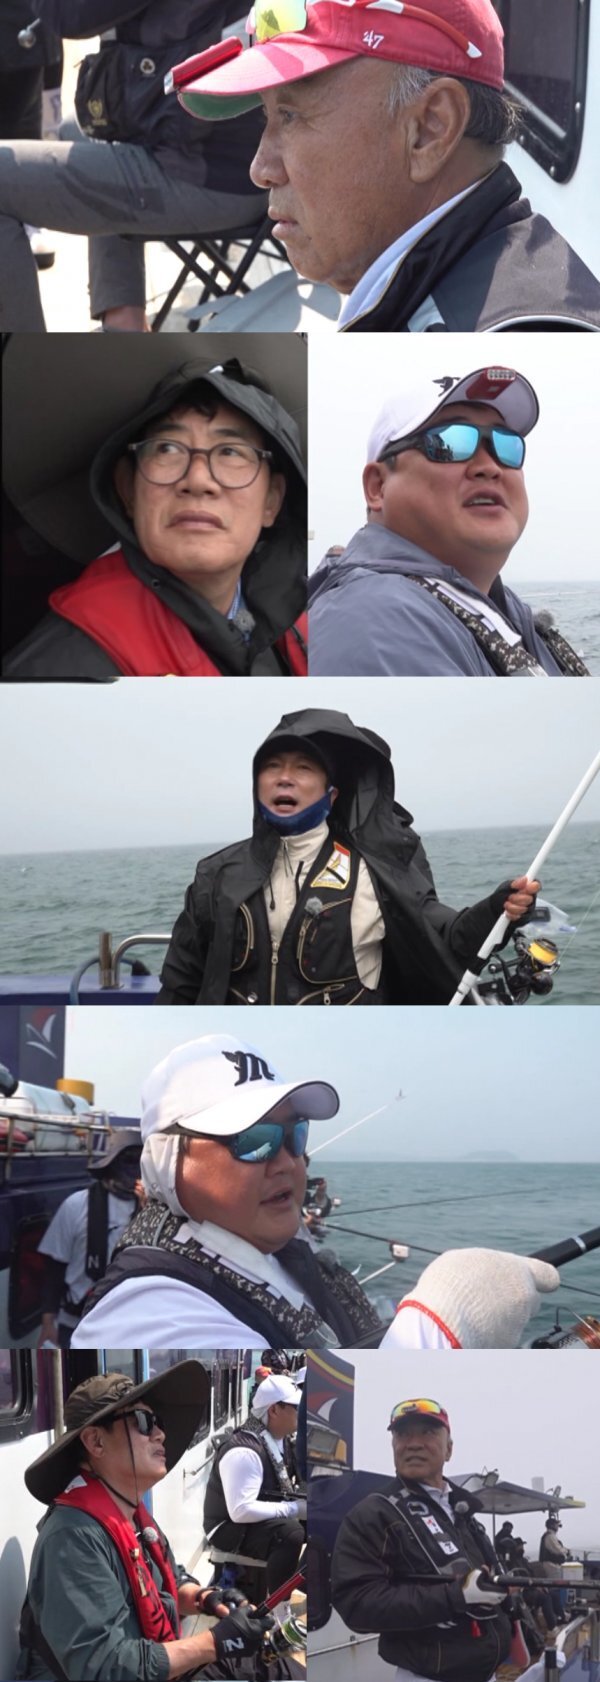 Channel A Entertainment, Follow MeThe Fishermen and the City City Season 3 (abbreviated The The Fishermen and the City) will be broadcast on the 22nd, with Lee Deok-hwa and Lee Kyung-kyu, Lee Soo-geun and Kim Joon-hyun in Anmyeondo, Taean, Chungnam. It is drawn to challenge fishing.According to the production team, fishing is a peak season, which is a confrontation with the maximum fish of the sea bream.In particular, Lee Deok-hwa, who has been to the production team and the preliminary exploration, has been full-fledged with all of the hope circuits claiming a dozen in an hour.However, after an hour of fishing, there is rarely news of the mouth, and one or two complaints are followed, and Lee Deok-hwa is unexpected Danger.Unlike the expectation that was swollen, the time of static flowed, and Lee Kyung-kyu, Lee Soo-geun, and Kim Joon-hyun began to pour out.Lee Deok-hwa said, I think I was caught stealing and it is strange. It is a moment to be a real fraud.We should come to a group of 30 people and ask. As the untouched continuesThe Fishermen and the City city as well as the production team are increasingly losing hope, and they are placed in an emergency situation called Noble Dome for nine hours of fishing.The production team declared abort and Lets not come (emergency) and the tension of The Fishermen and the City begins to drop sharply.In the end, Lee Kyung-kyu said, I am over, and Kim Joon-hyun, who has only one golden badge, was in a situation where he had to accept his fate as a badger.Also, Lee Soo-geun began to collapse his mentality as he fell into Danger, which would miss the difficult super badge in a week.Whether The Fishermen and the City will be able to pass the Danger of Bang safely in the emergency appearance of Amyeondo, it will be released at The The Fishermen and the City which is broadcasted at 10:30 pm on Thursday night.